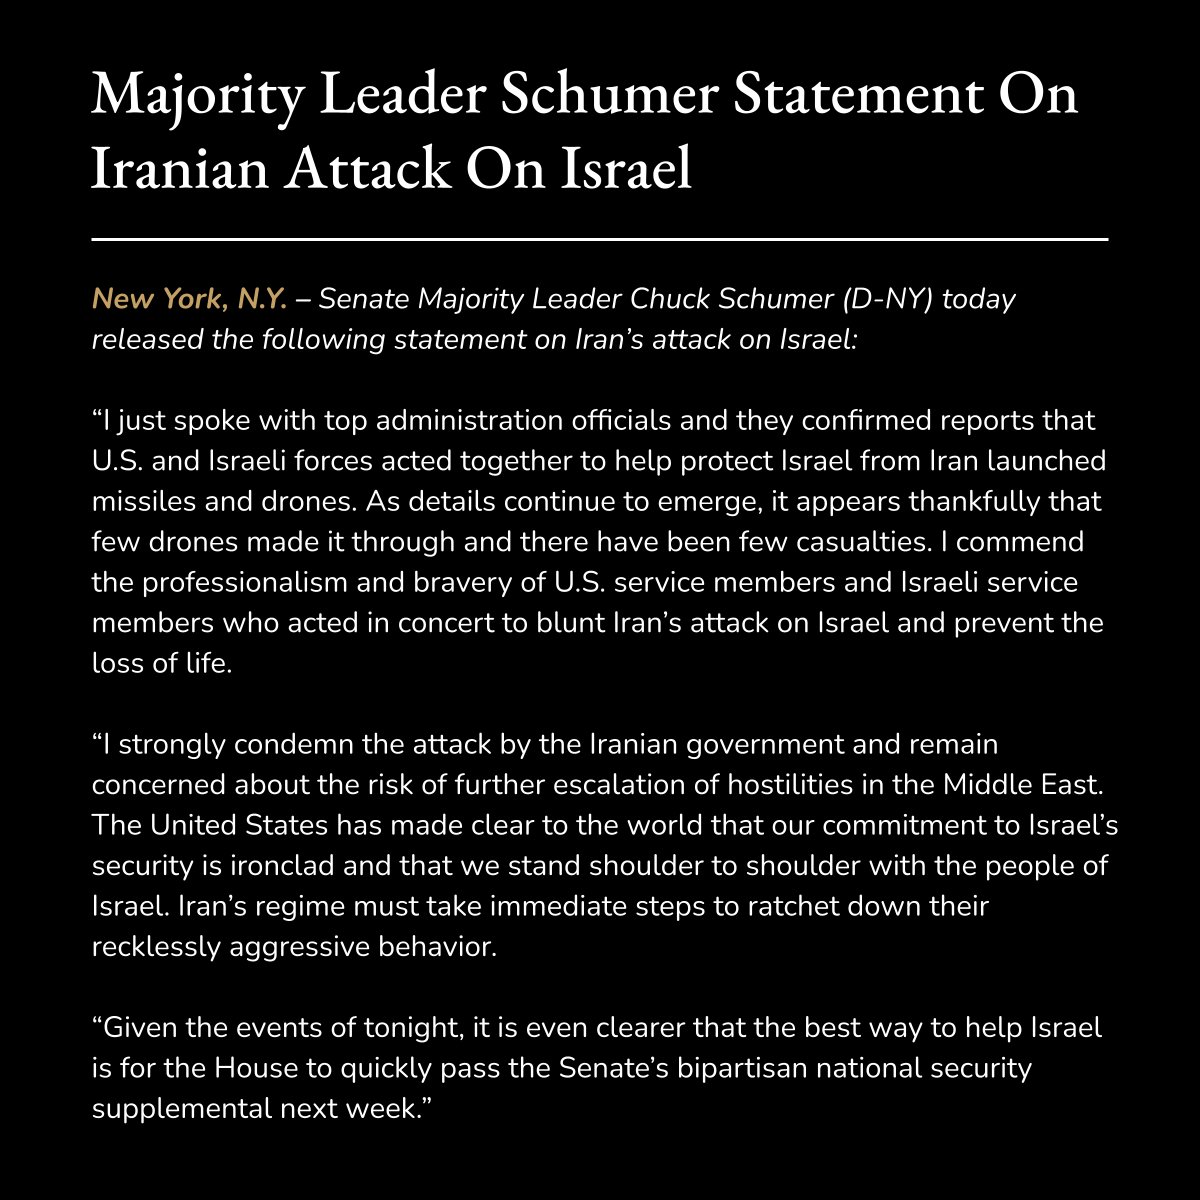 I just spoke with top administration officials and they confirmed reports that U.S. and Israeli forces acted together to help protect Israel from Iran launched missiles and drones. My statement: